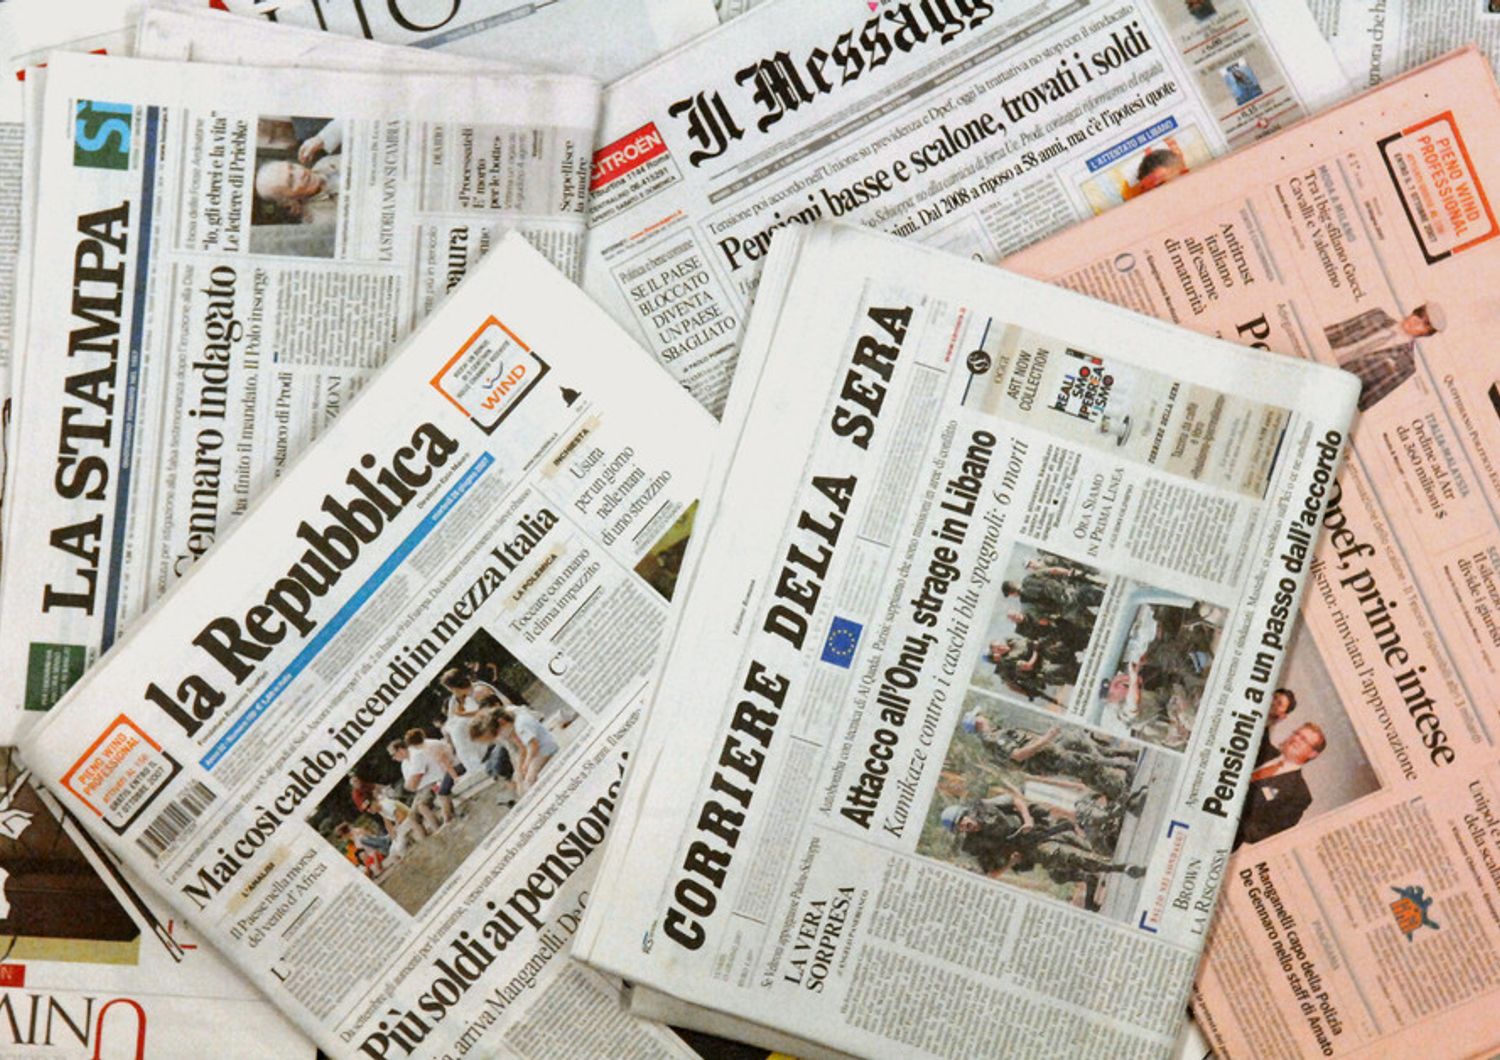 giornali quotidiani stampa (Agf)&nbsp;